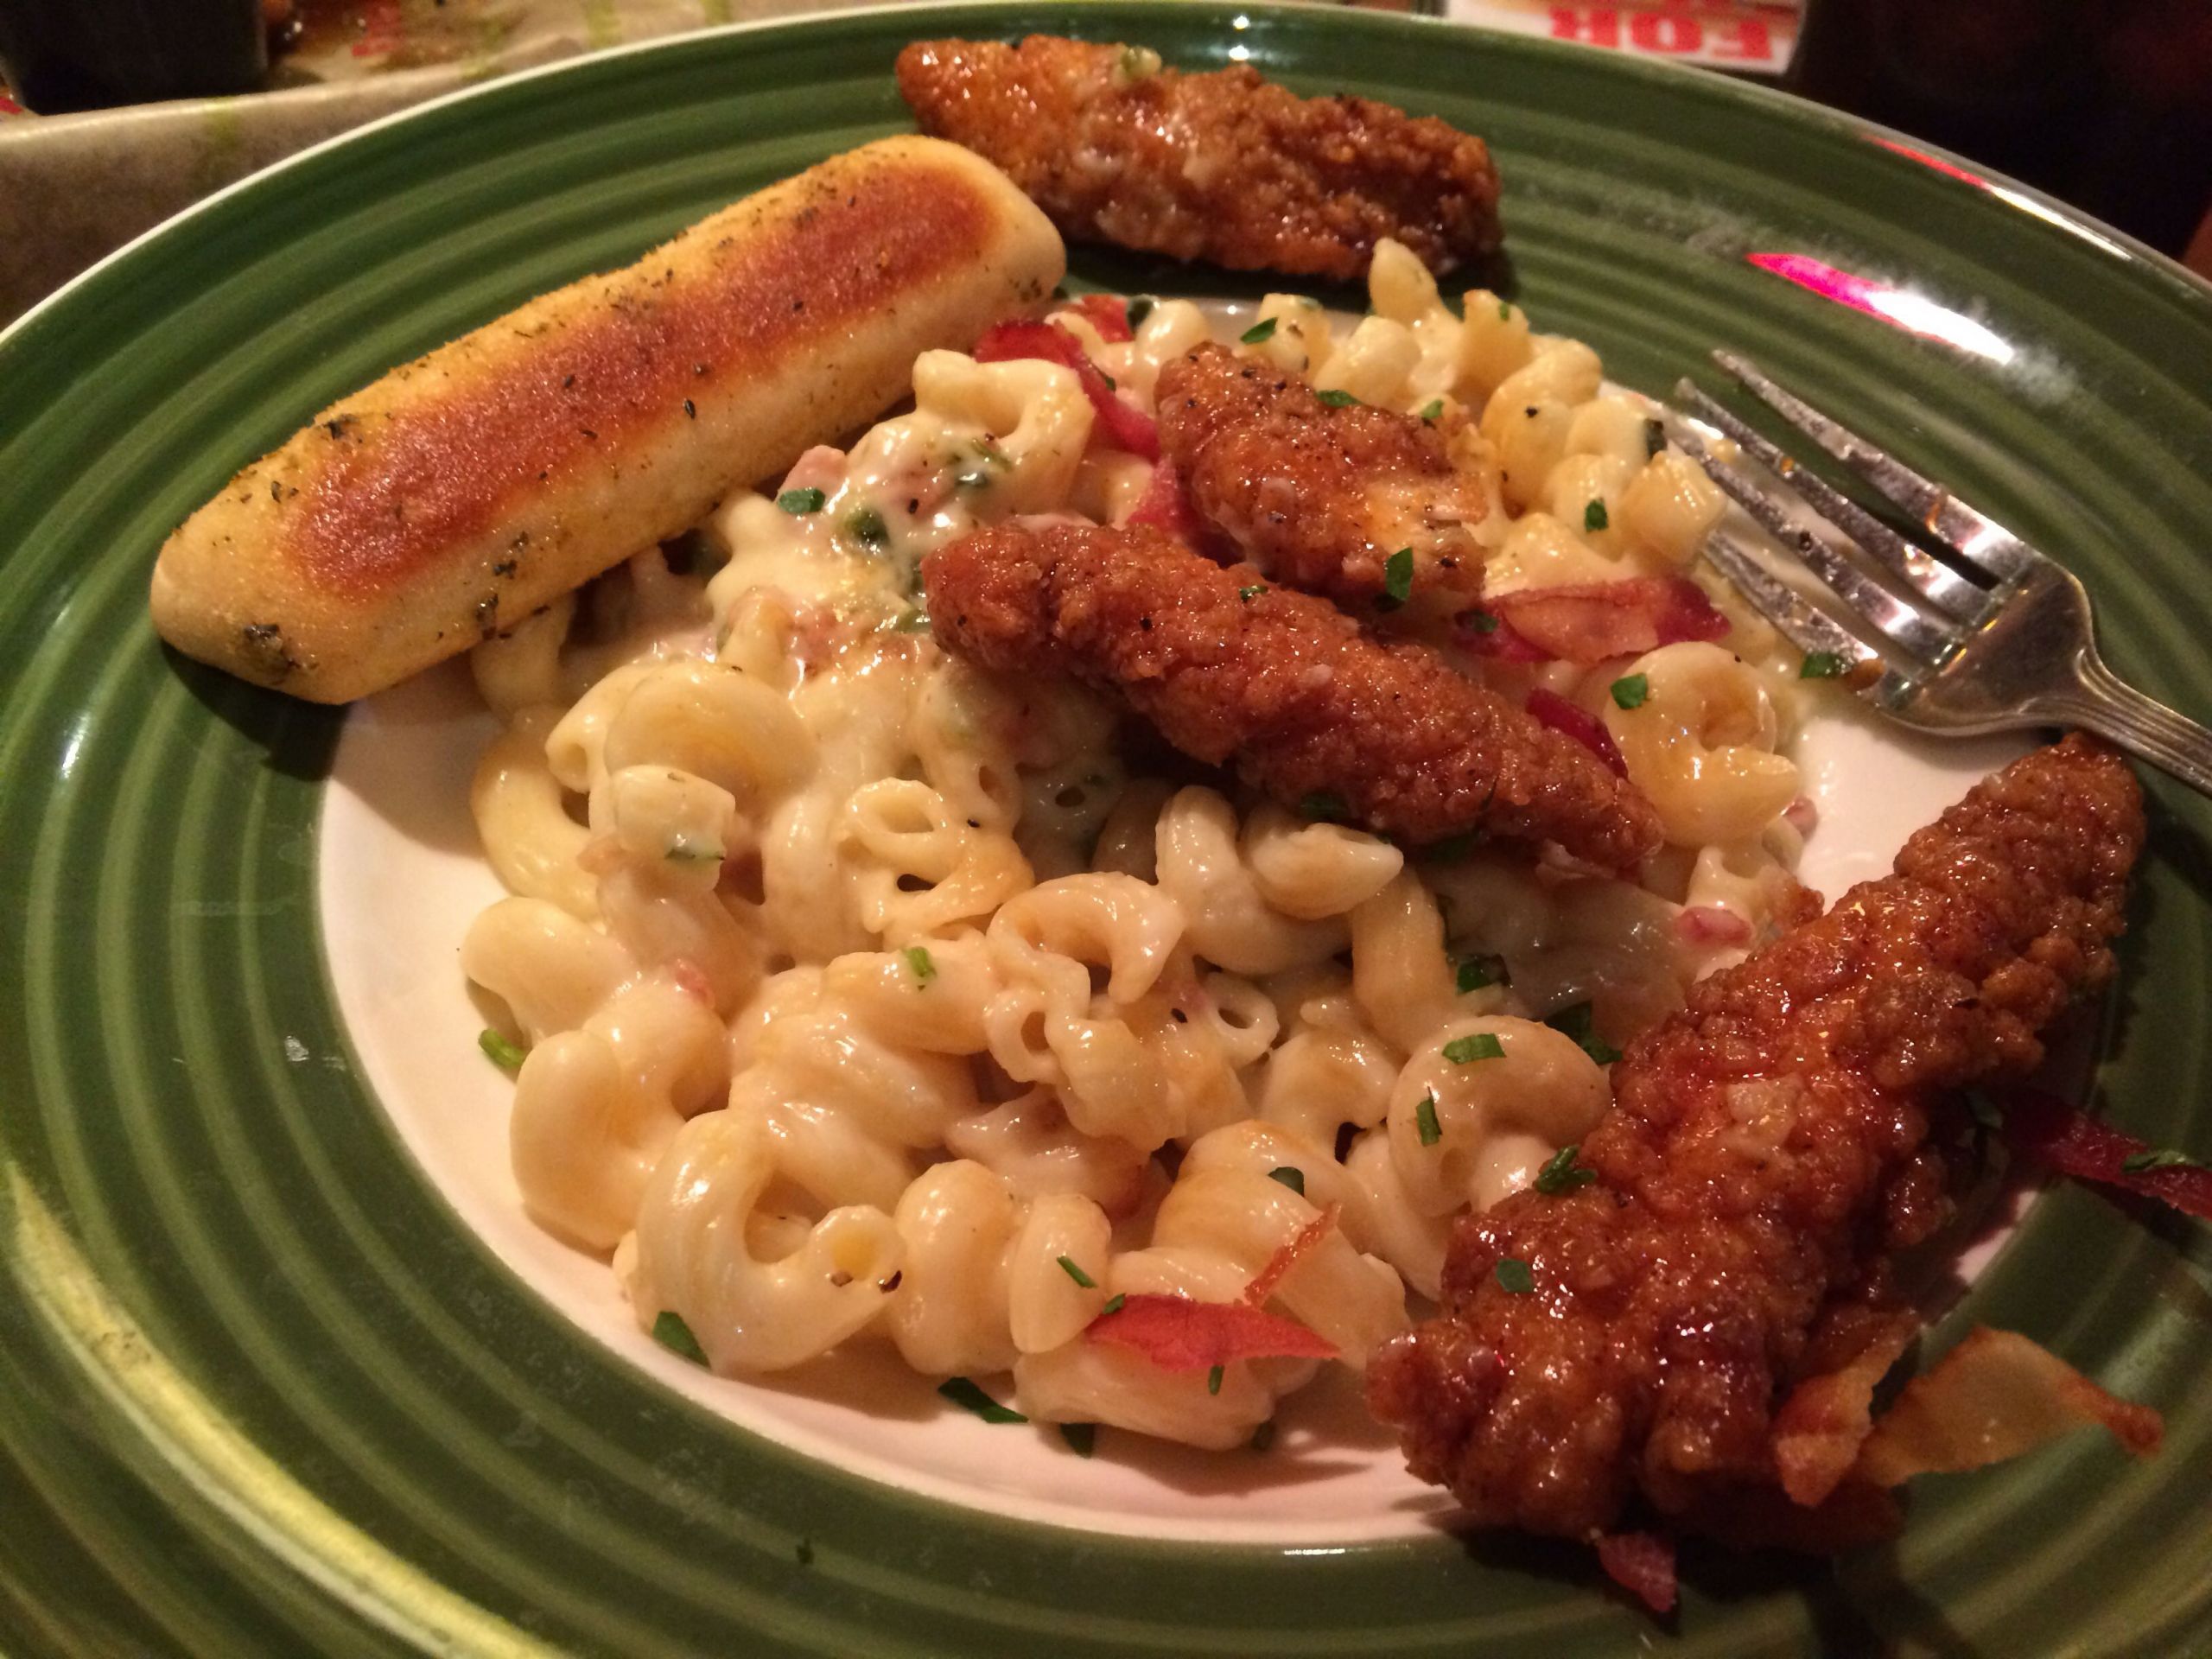 4-Cheese Mac &amp; Cheese With Honey Pepper Chicken Tenders
 Applebee s 4 cheese Mac and cheese with honey and pepper